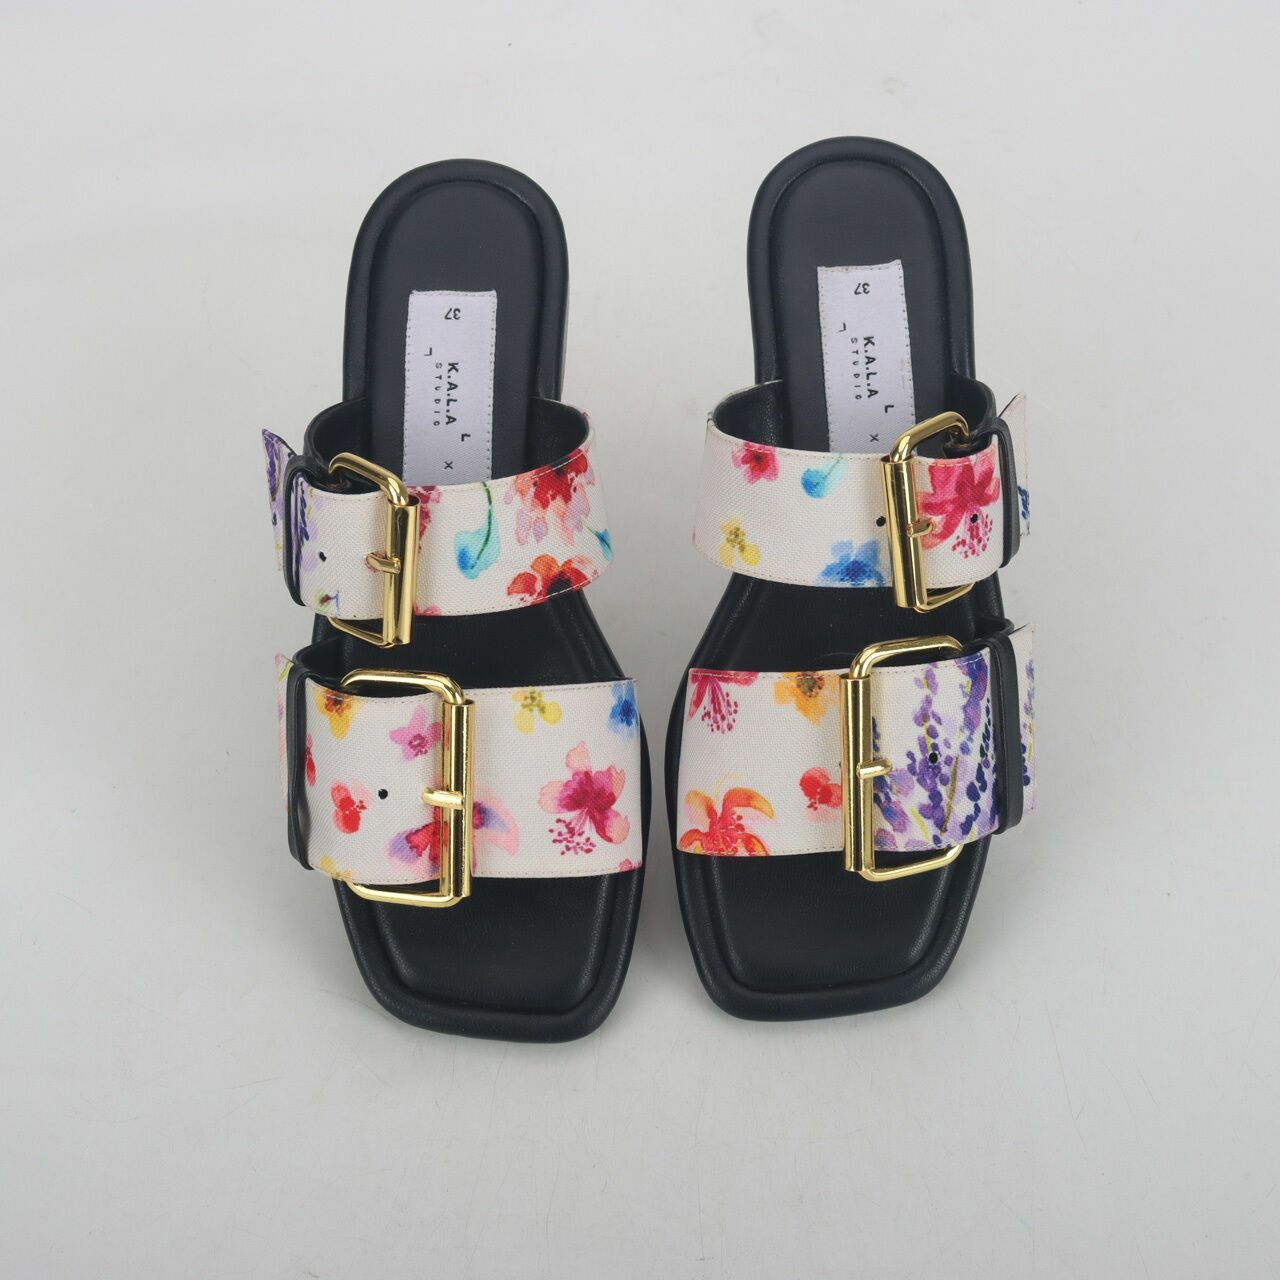 K.A.L.A Studio x MADER Double Buckle Square Toe Tropical Bliss Black Sandals